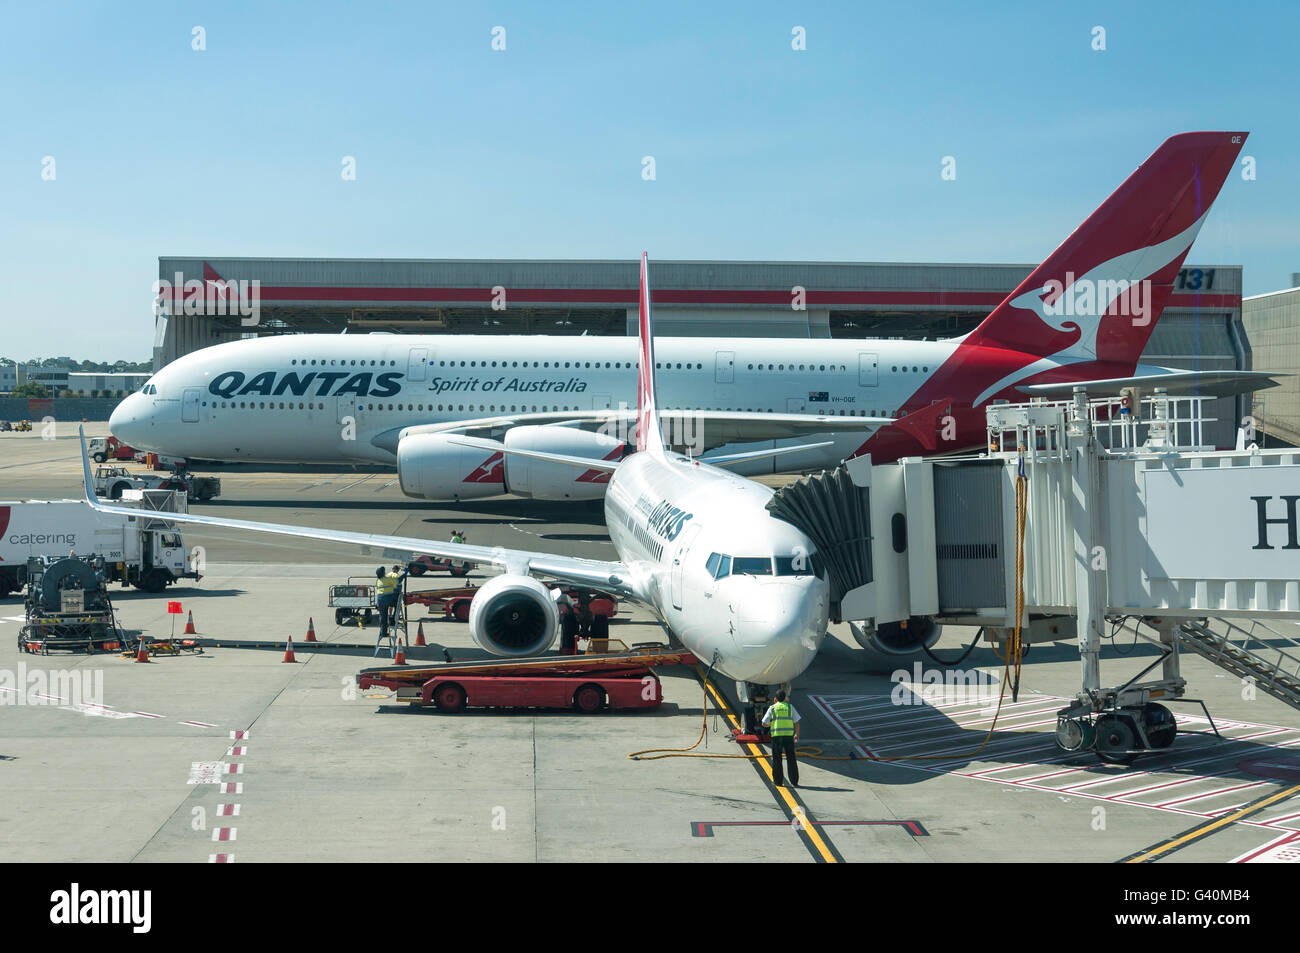 Qantas Boeing Dreamliner and Airbus A380 aircraft at Sydney Kingsford Smith Airport, Mascot, Sydney, New South Wales, Australia Stock Photo